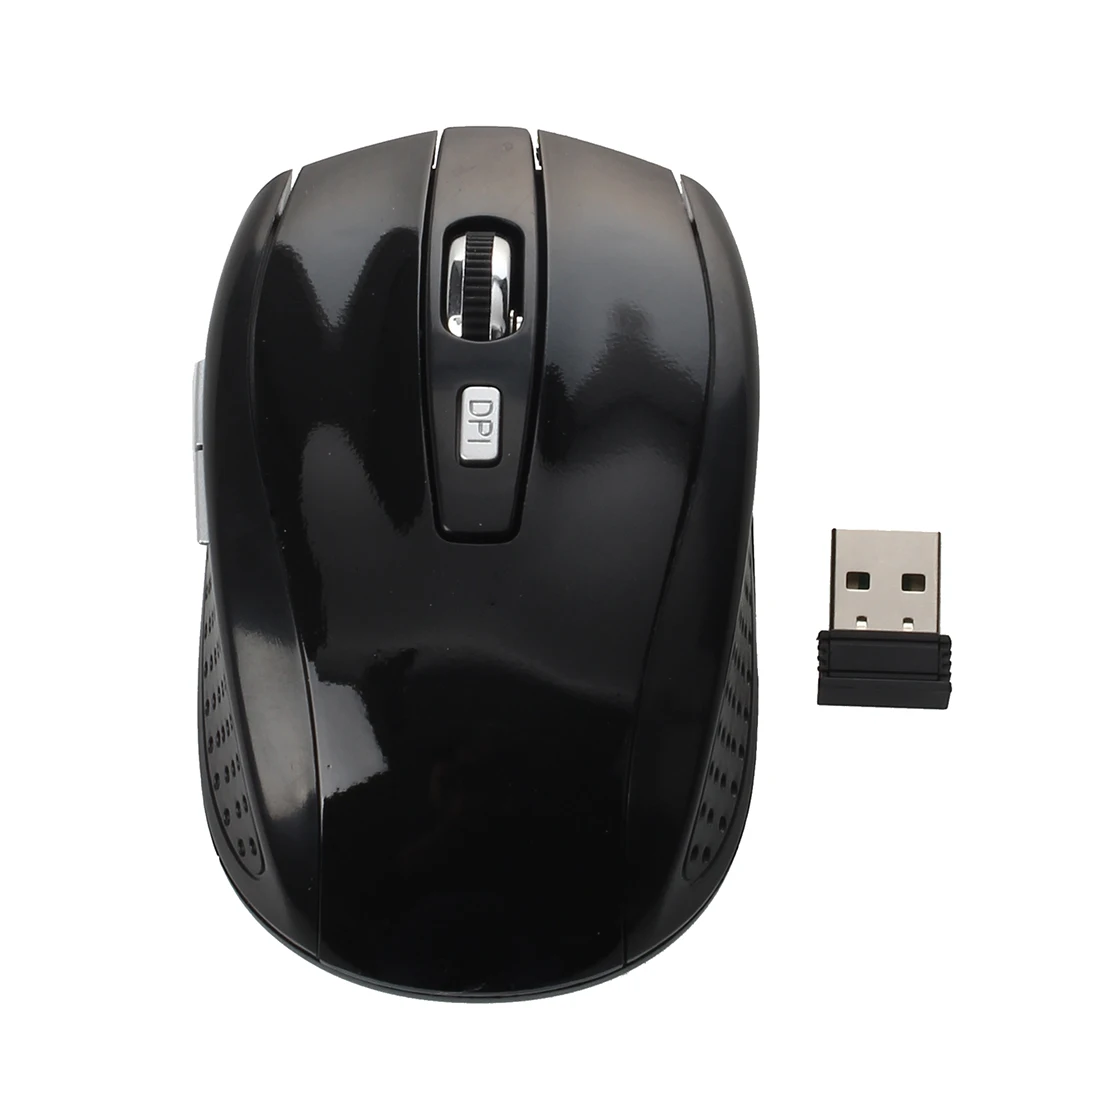 2.4GHz Wireless Cordless Optical Scroll Computer PC Mouse Foldable USB Dongle